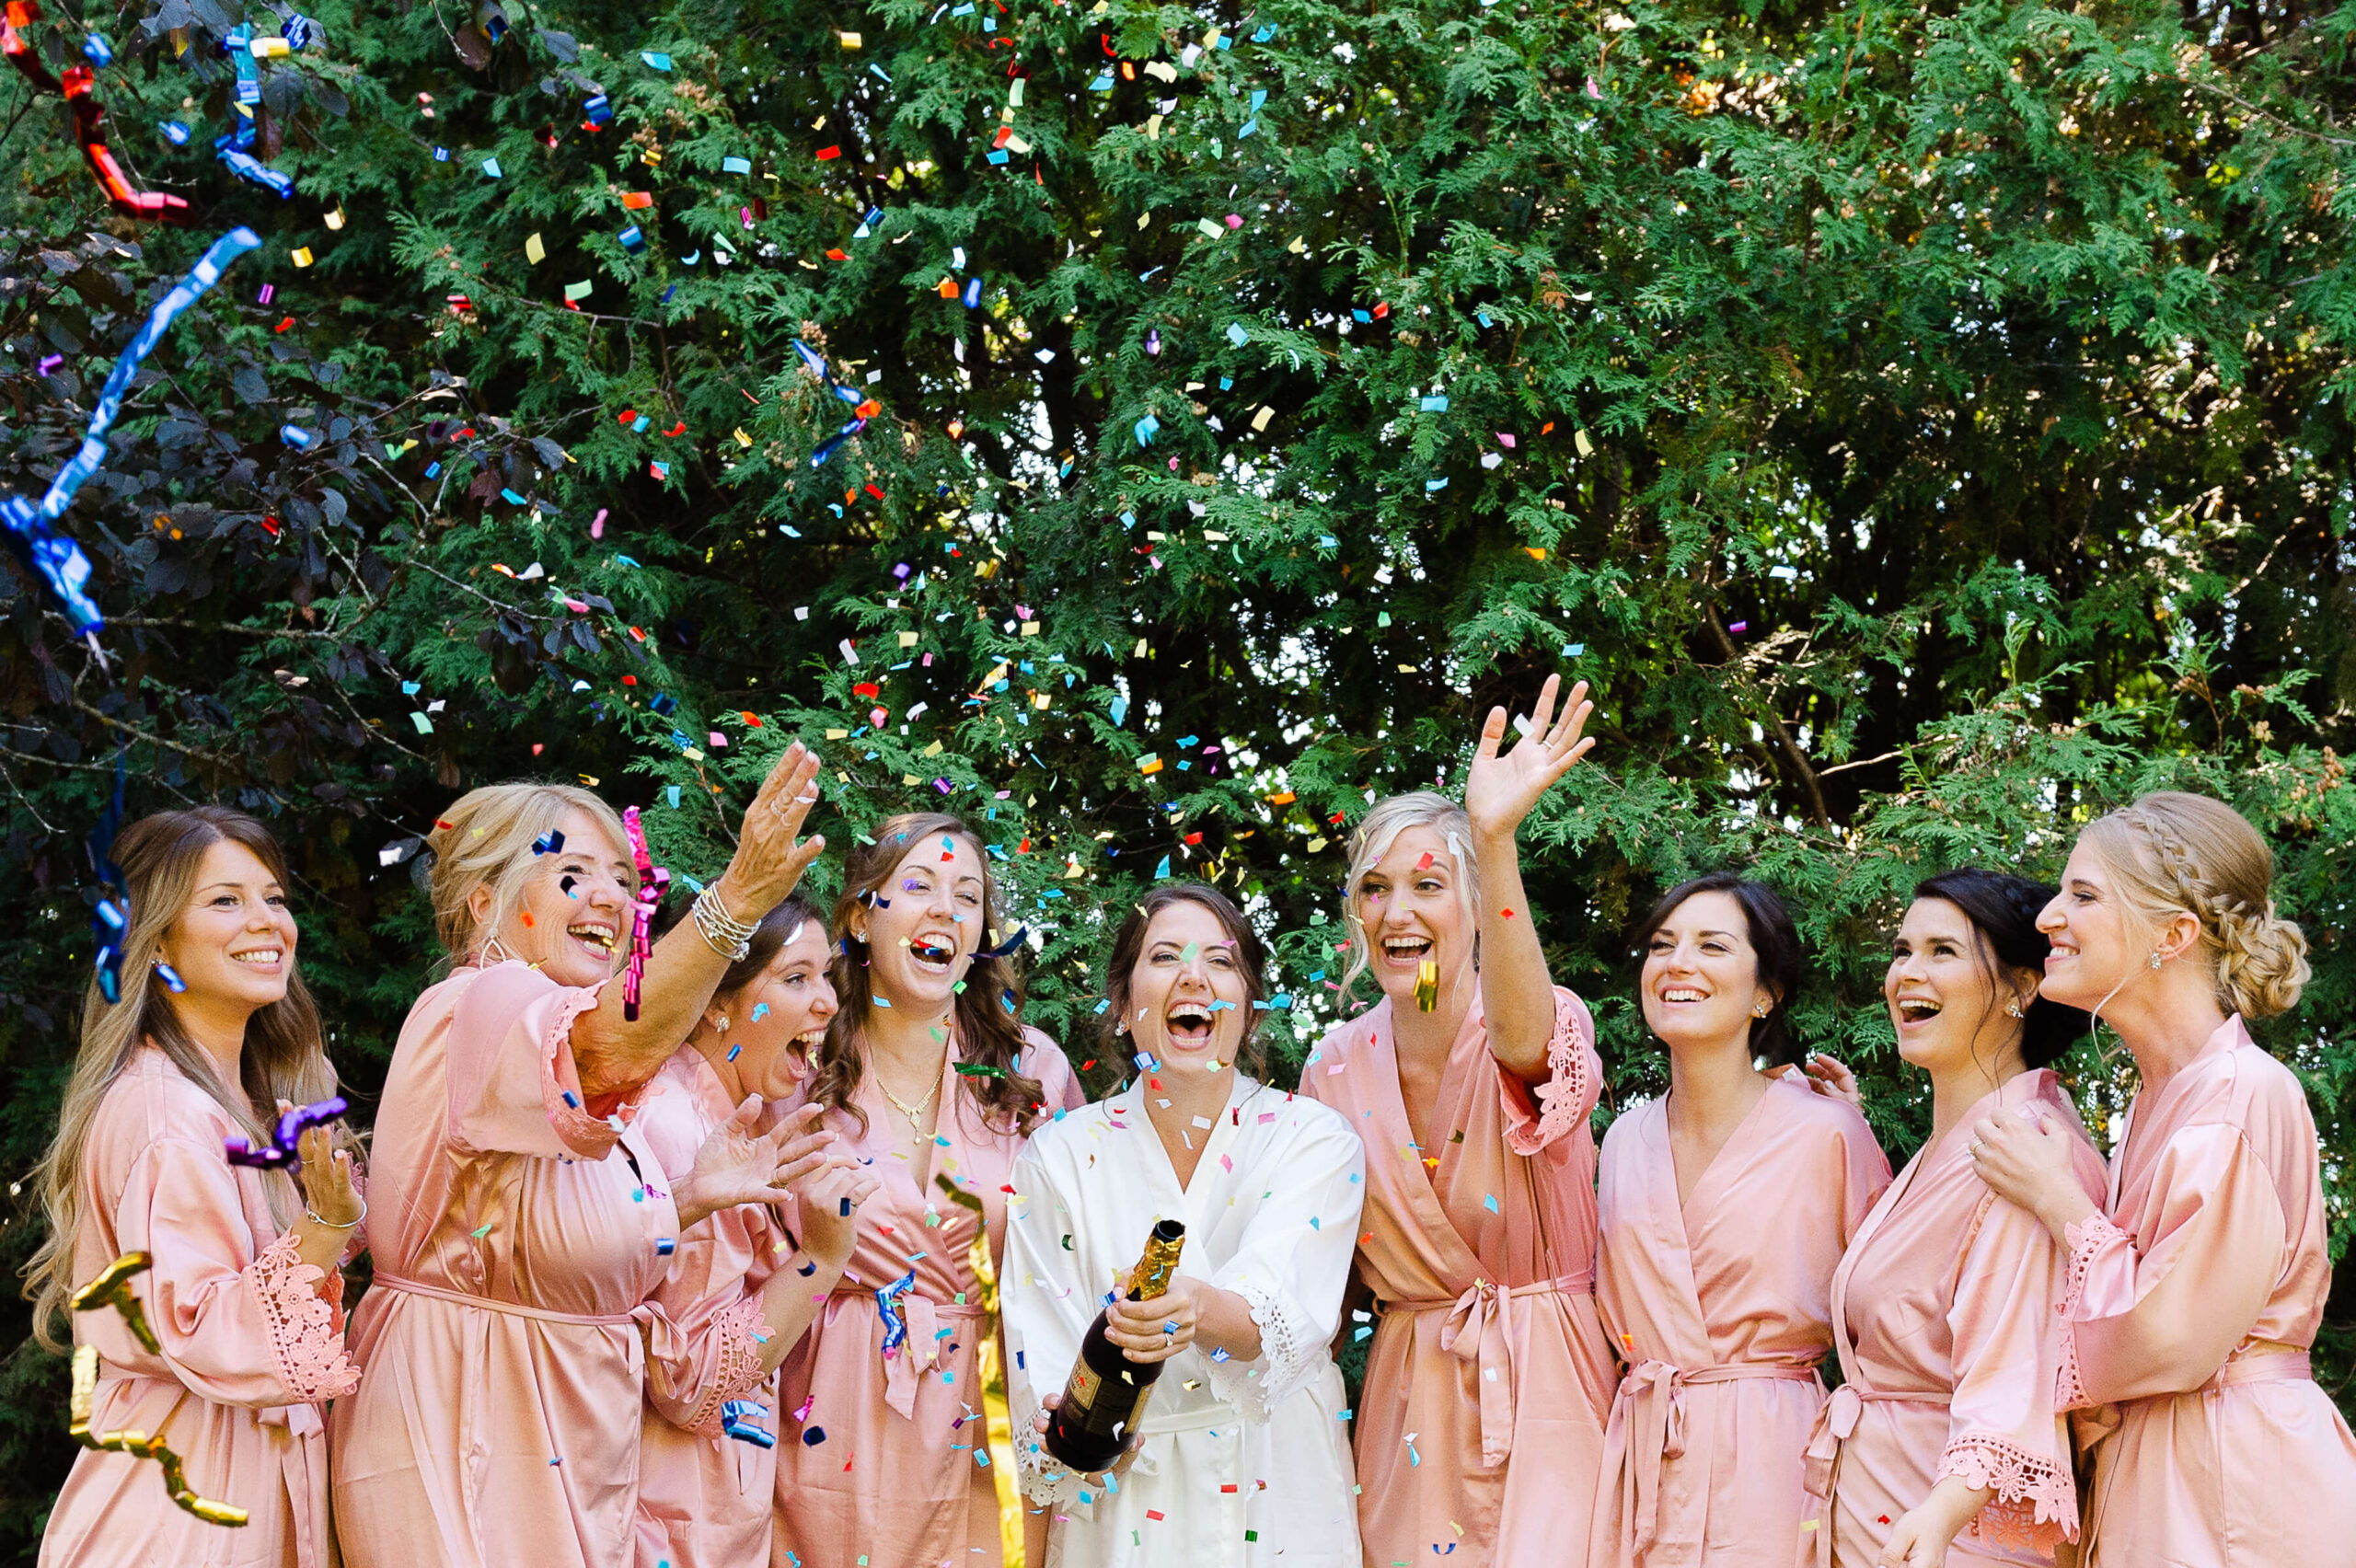 a bride popping a champagne streamer bottle with her bridesmaids dressed in pink robes. Wedding organized by Opportunity Knocks Events